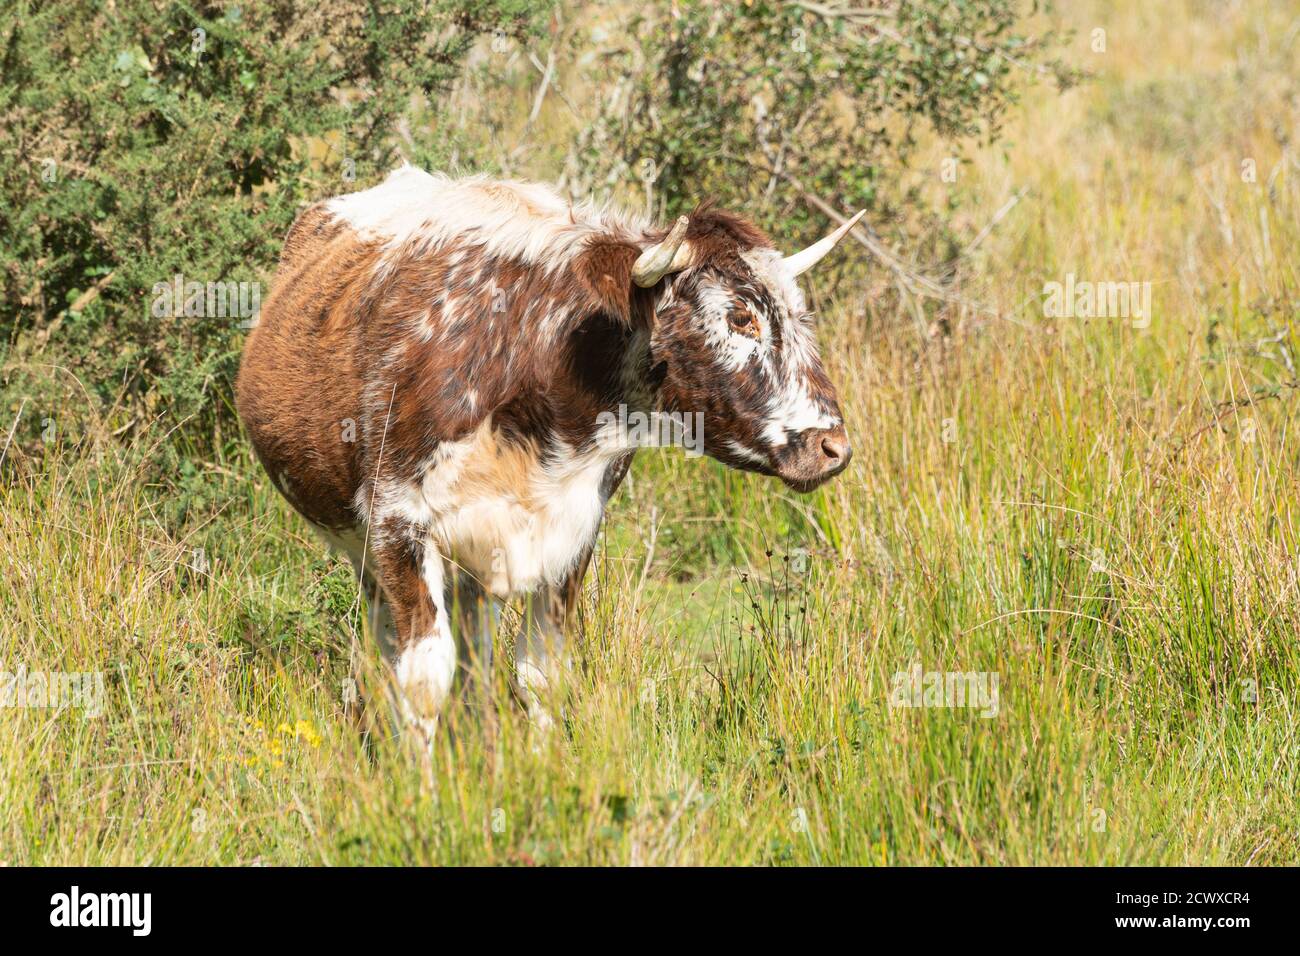 Old English longhorn bull (formerly called Lancashire cattle), a brown and white breed, UK Stock Photo